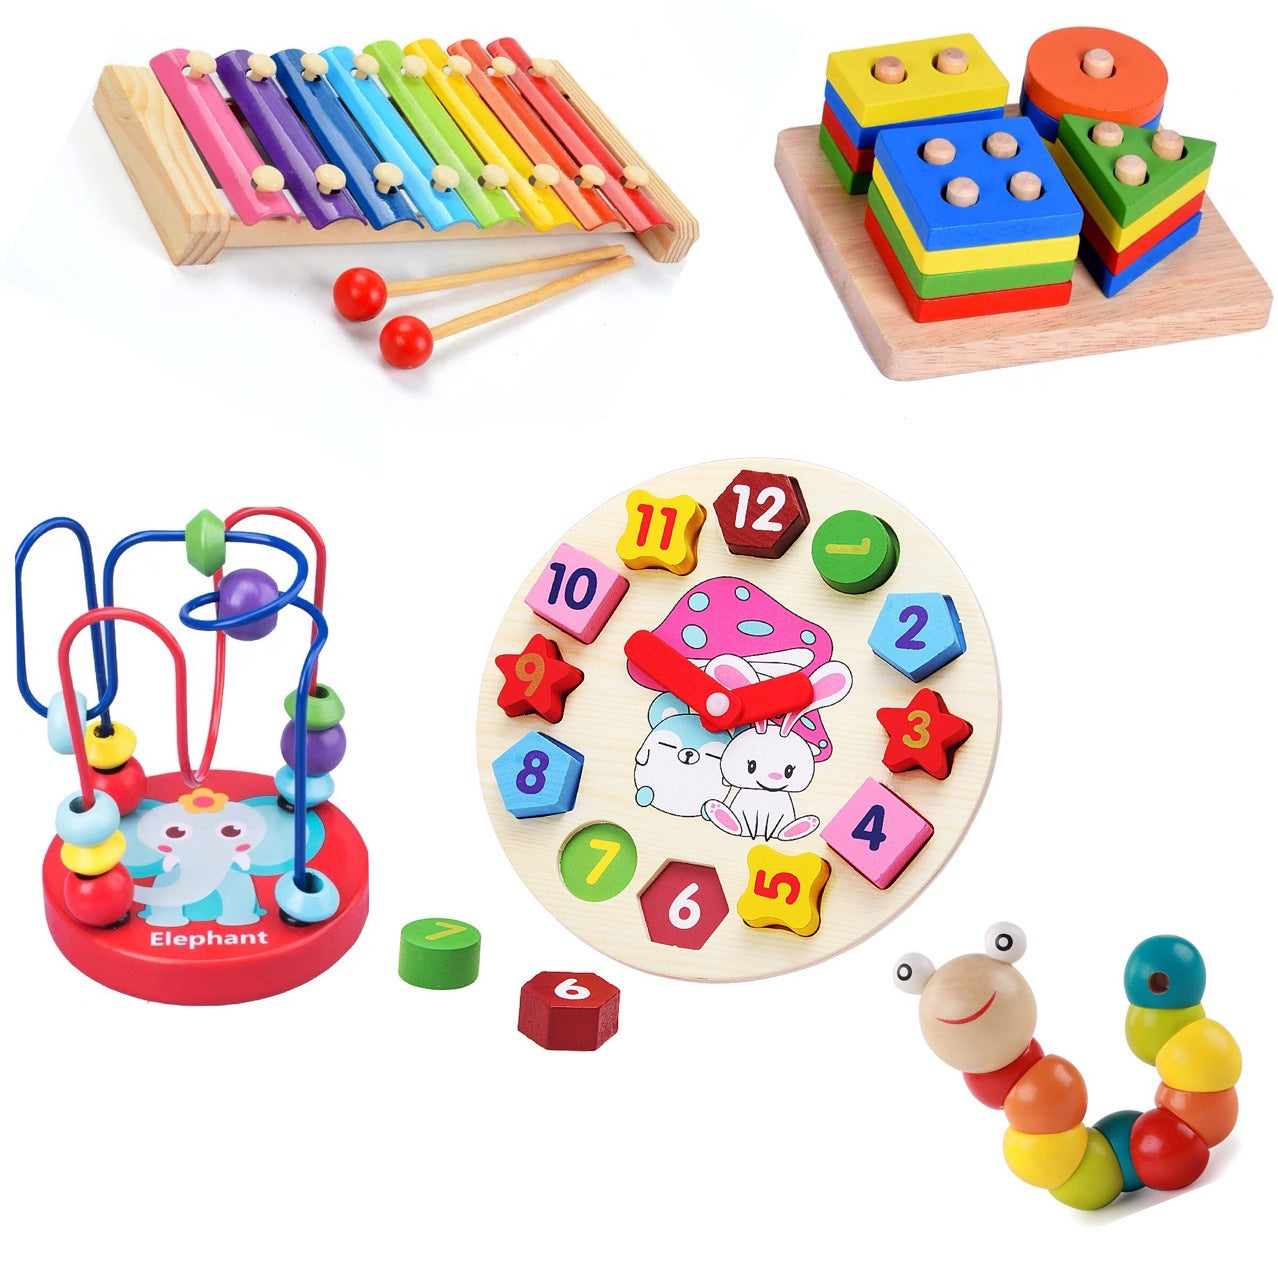 "Educational Ball Beaded Building Blocks for Babies - 6-12 Months - Ideal for 1-3 Year Old Boys and Girls"